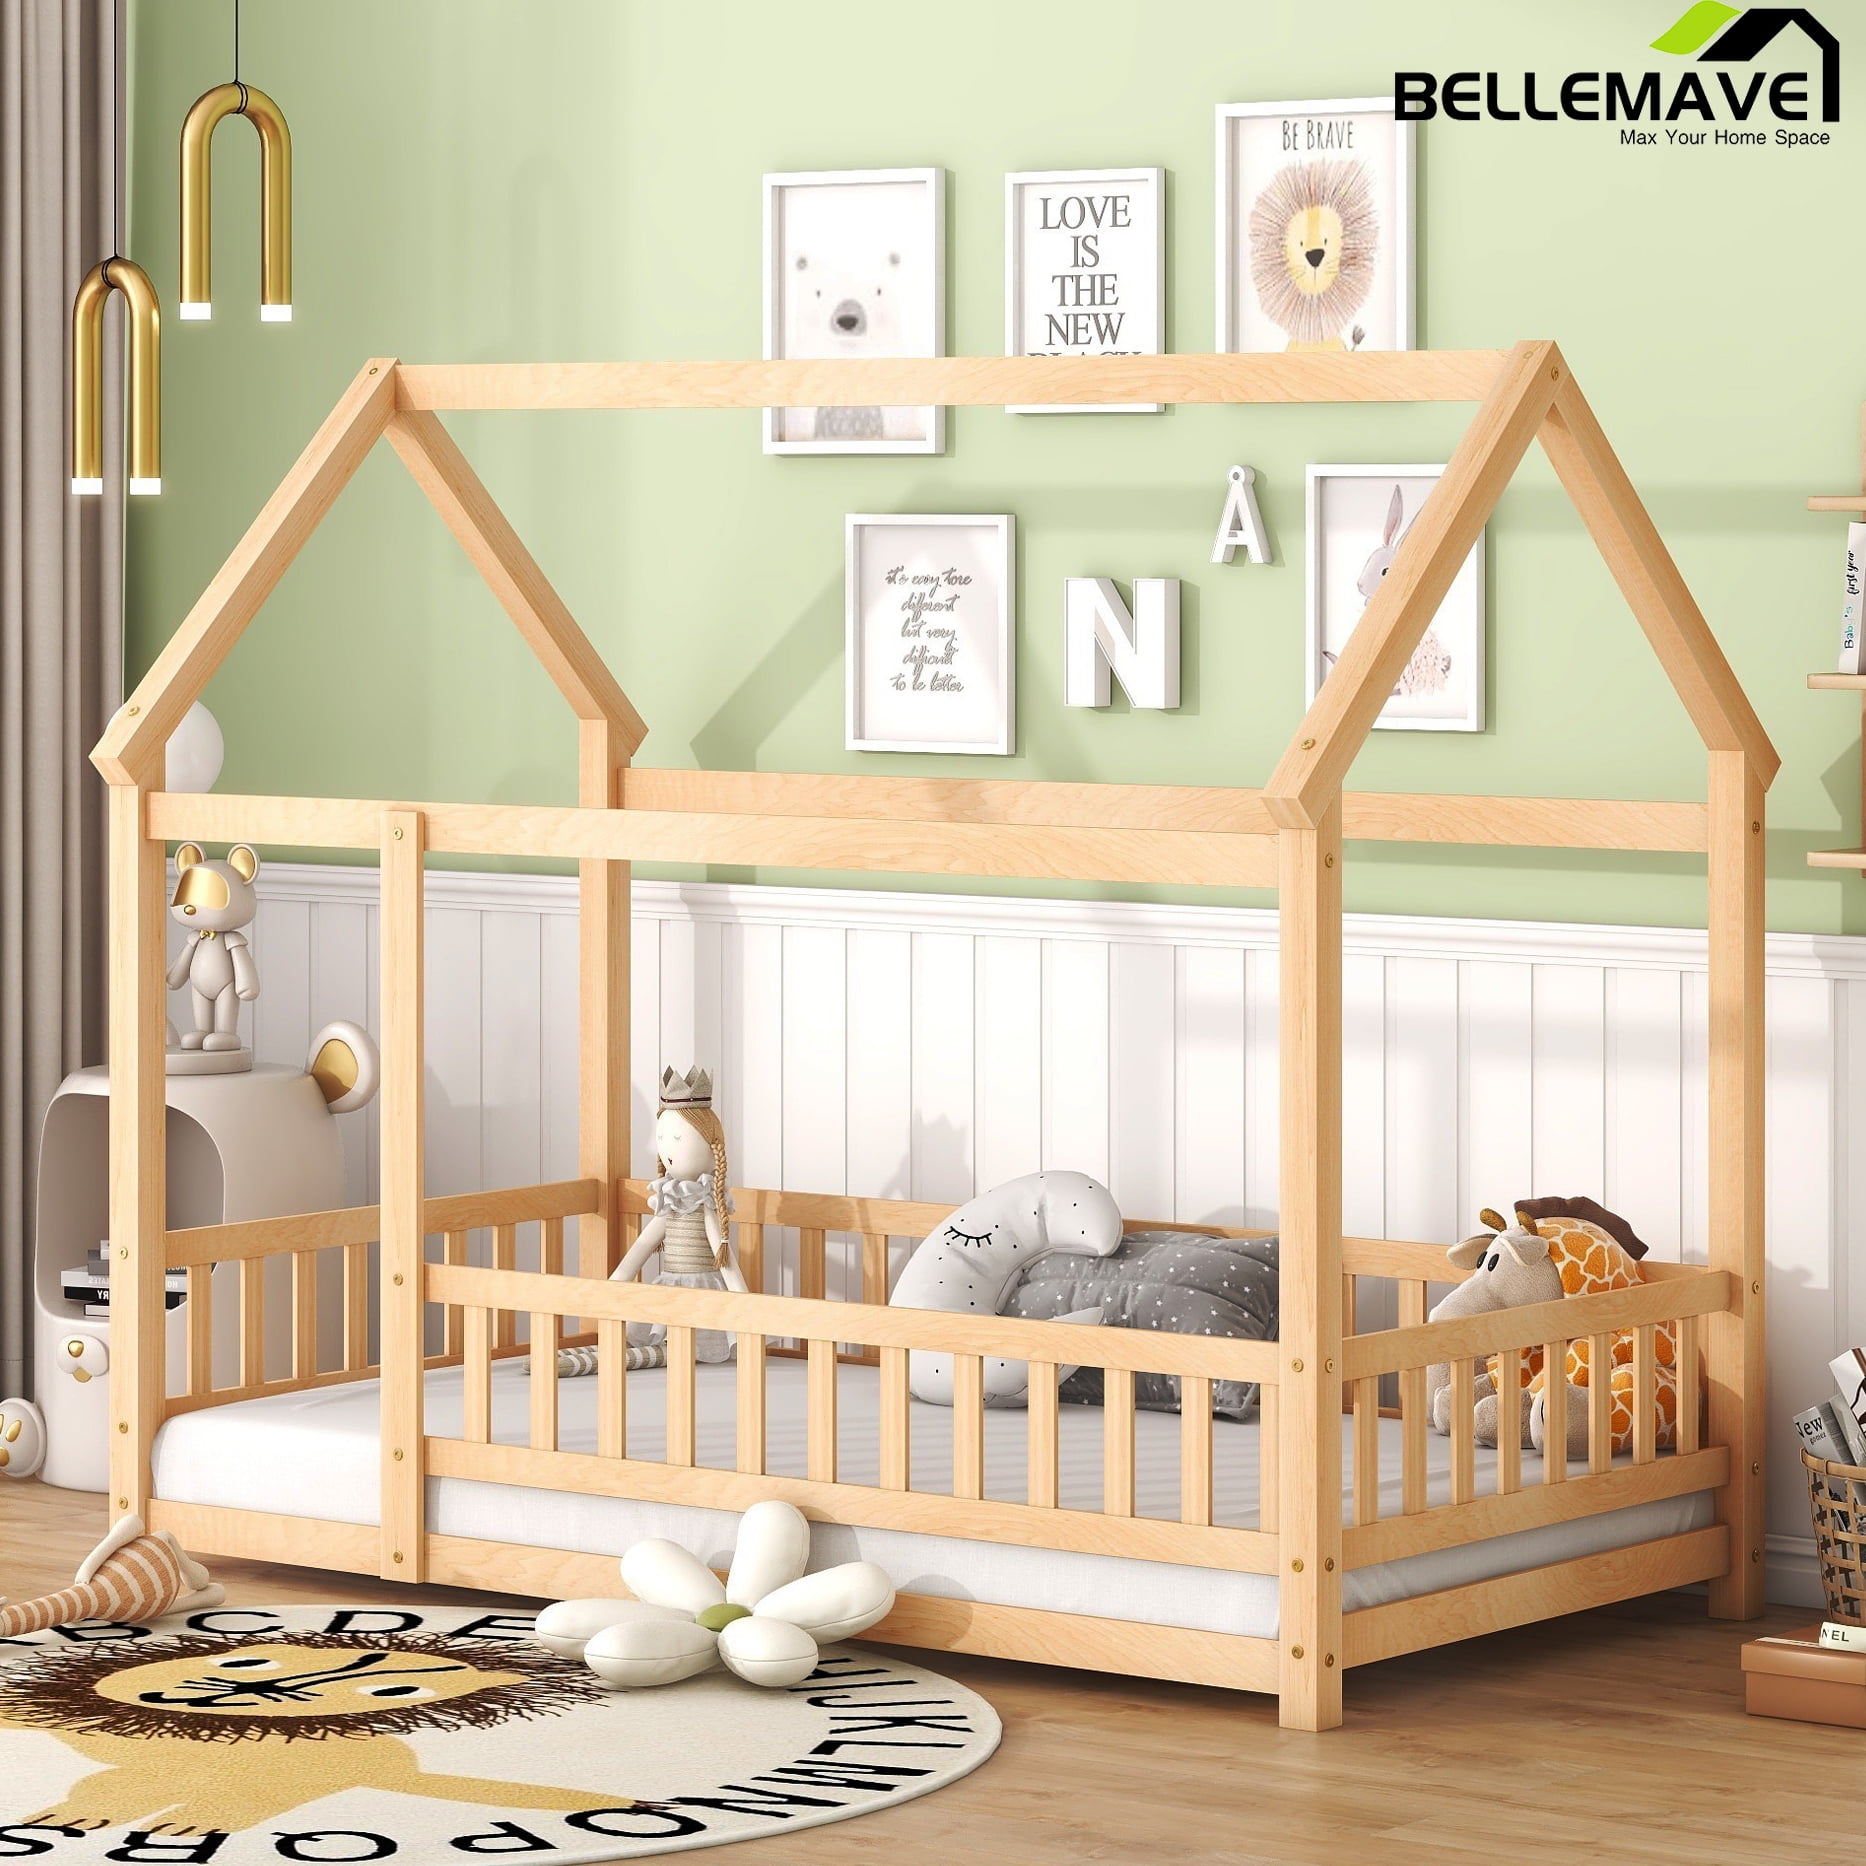 Bellemave Twin Floor Bed for Kids, Wood Twin Size House Bed Frame with ...